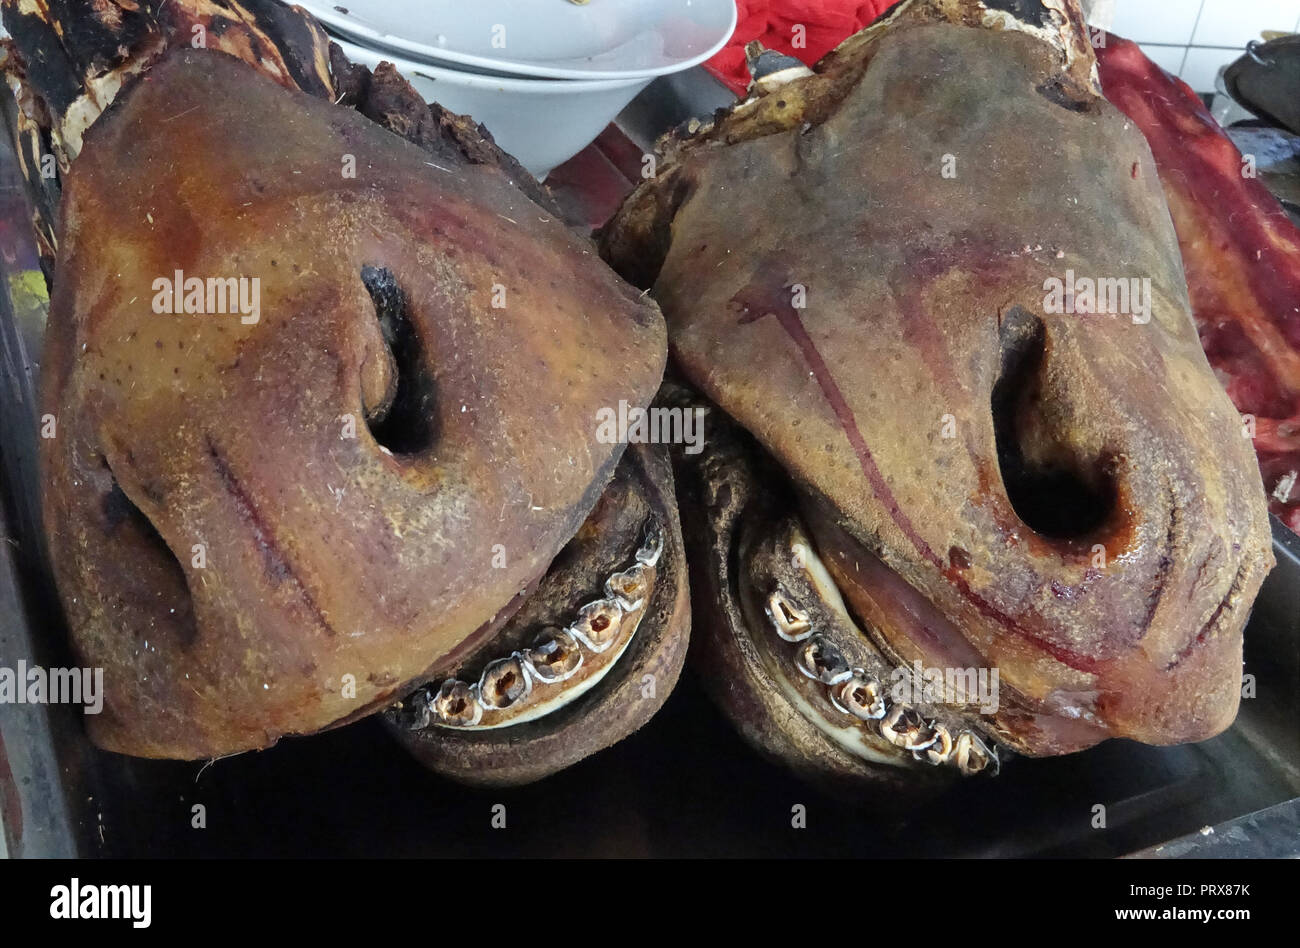 cattle head portions with nostrils and broken teeth for sale at meat stall at local public market Stock Photo